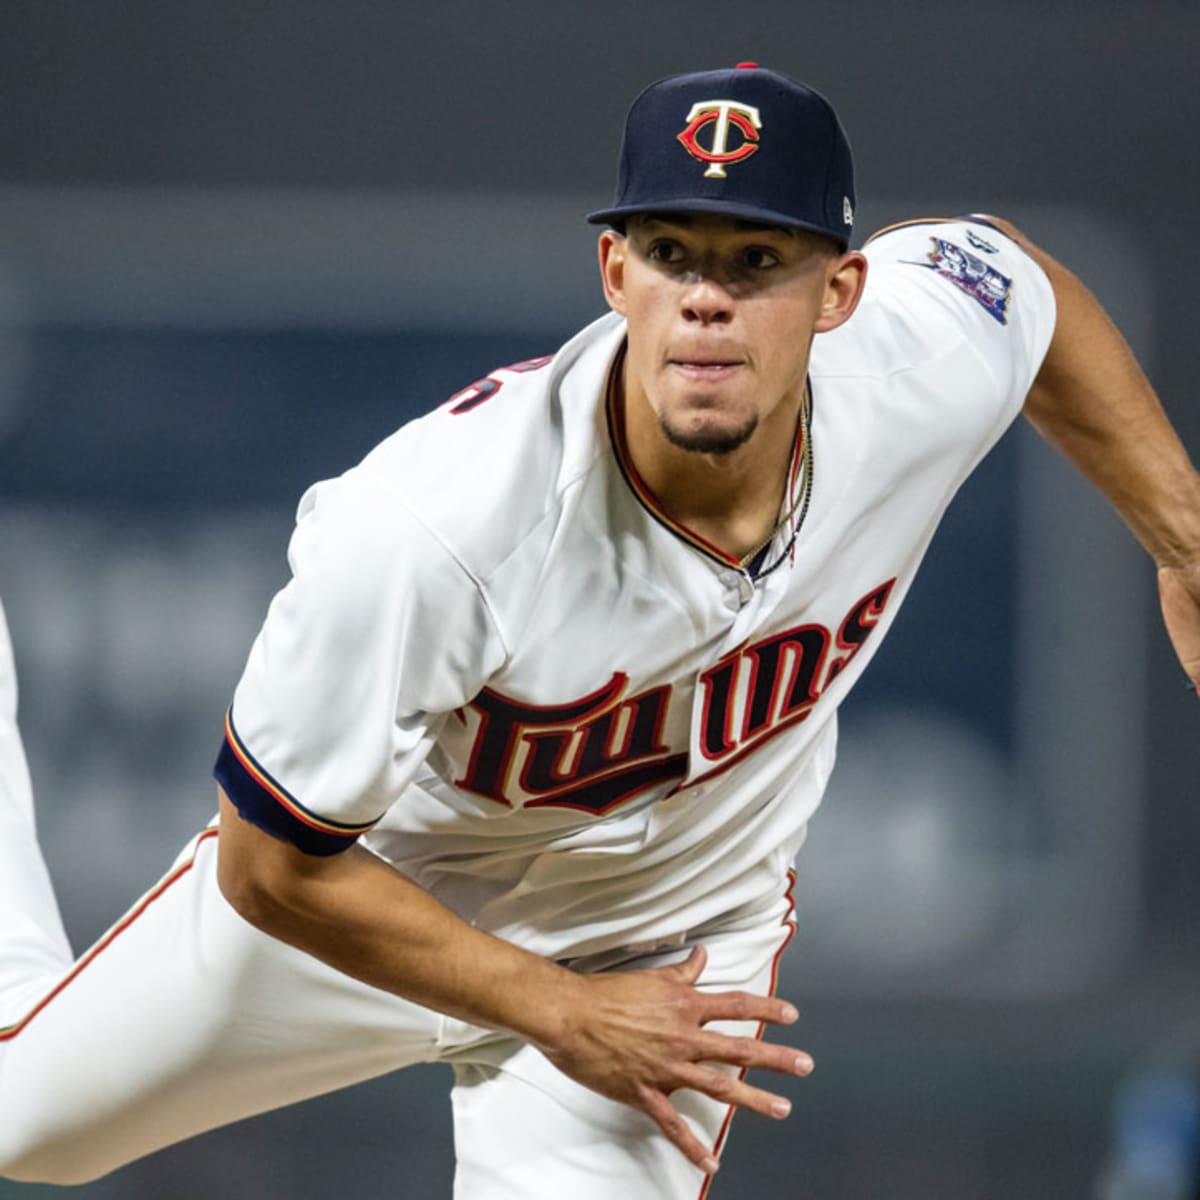 Jose Berrios grew up with the Twins. Now he'll try to beat them.